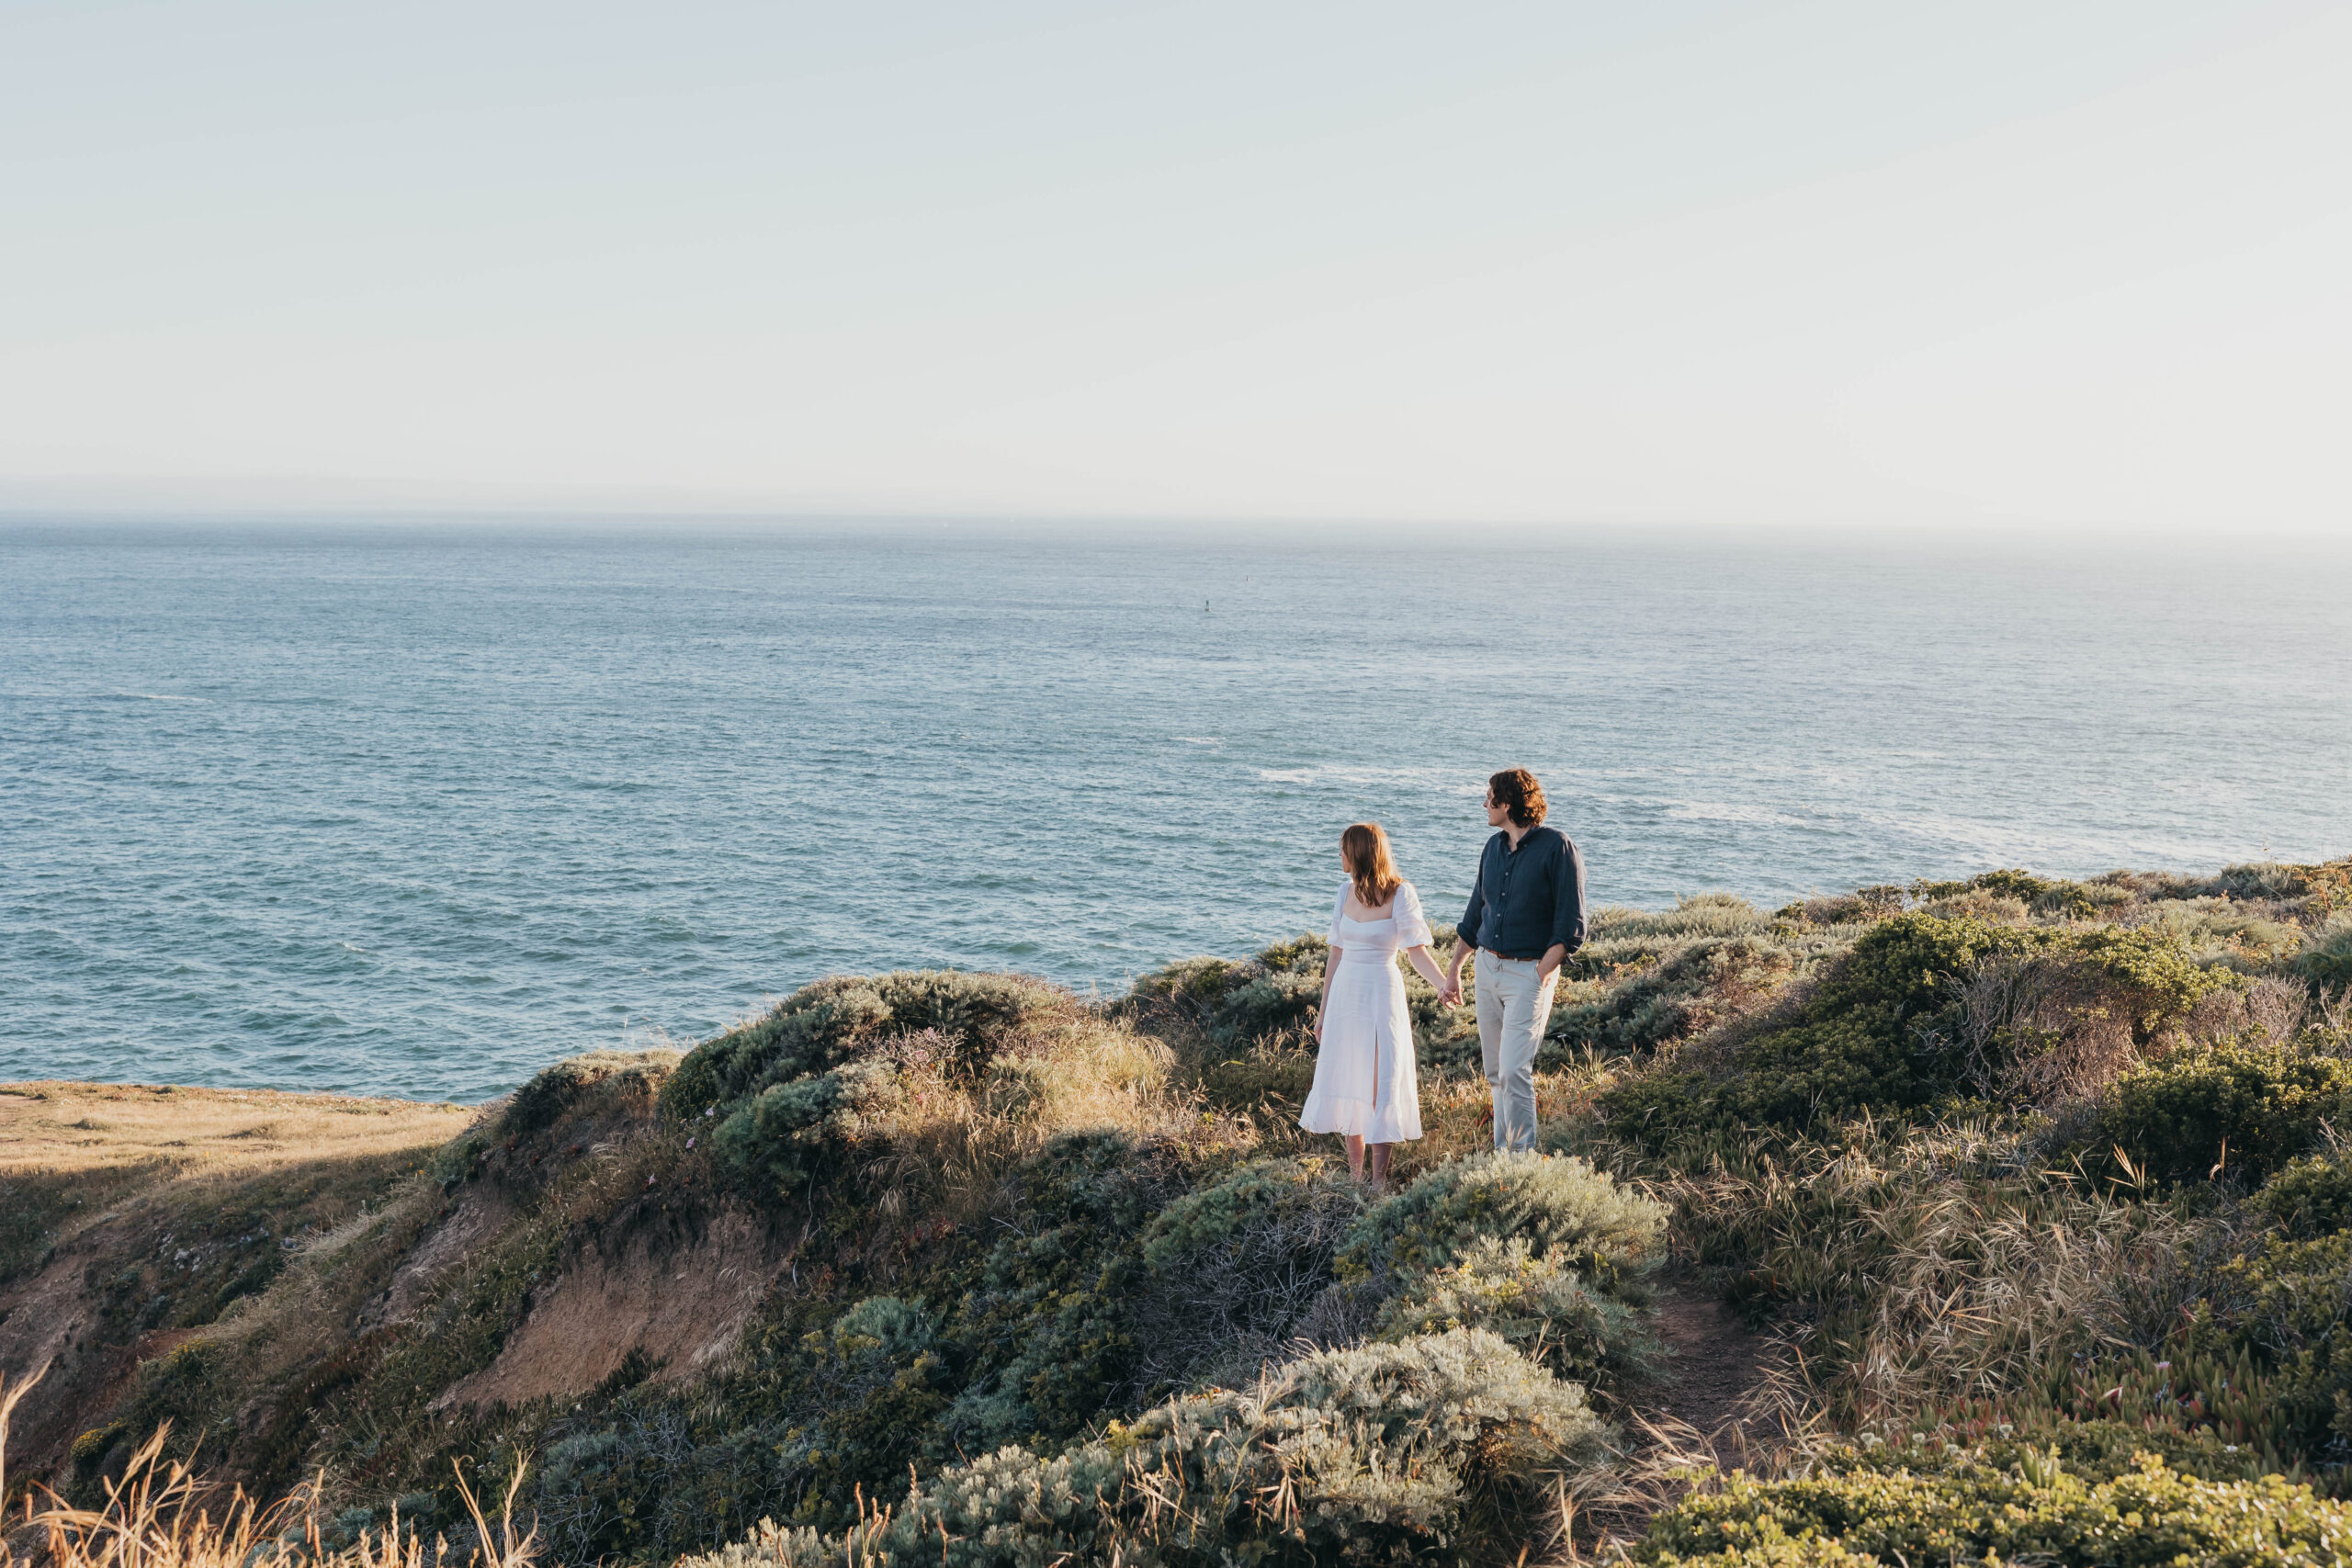 Two people stand on a grassy cliff overlooking the ocean on a clear day